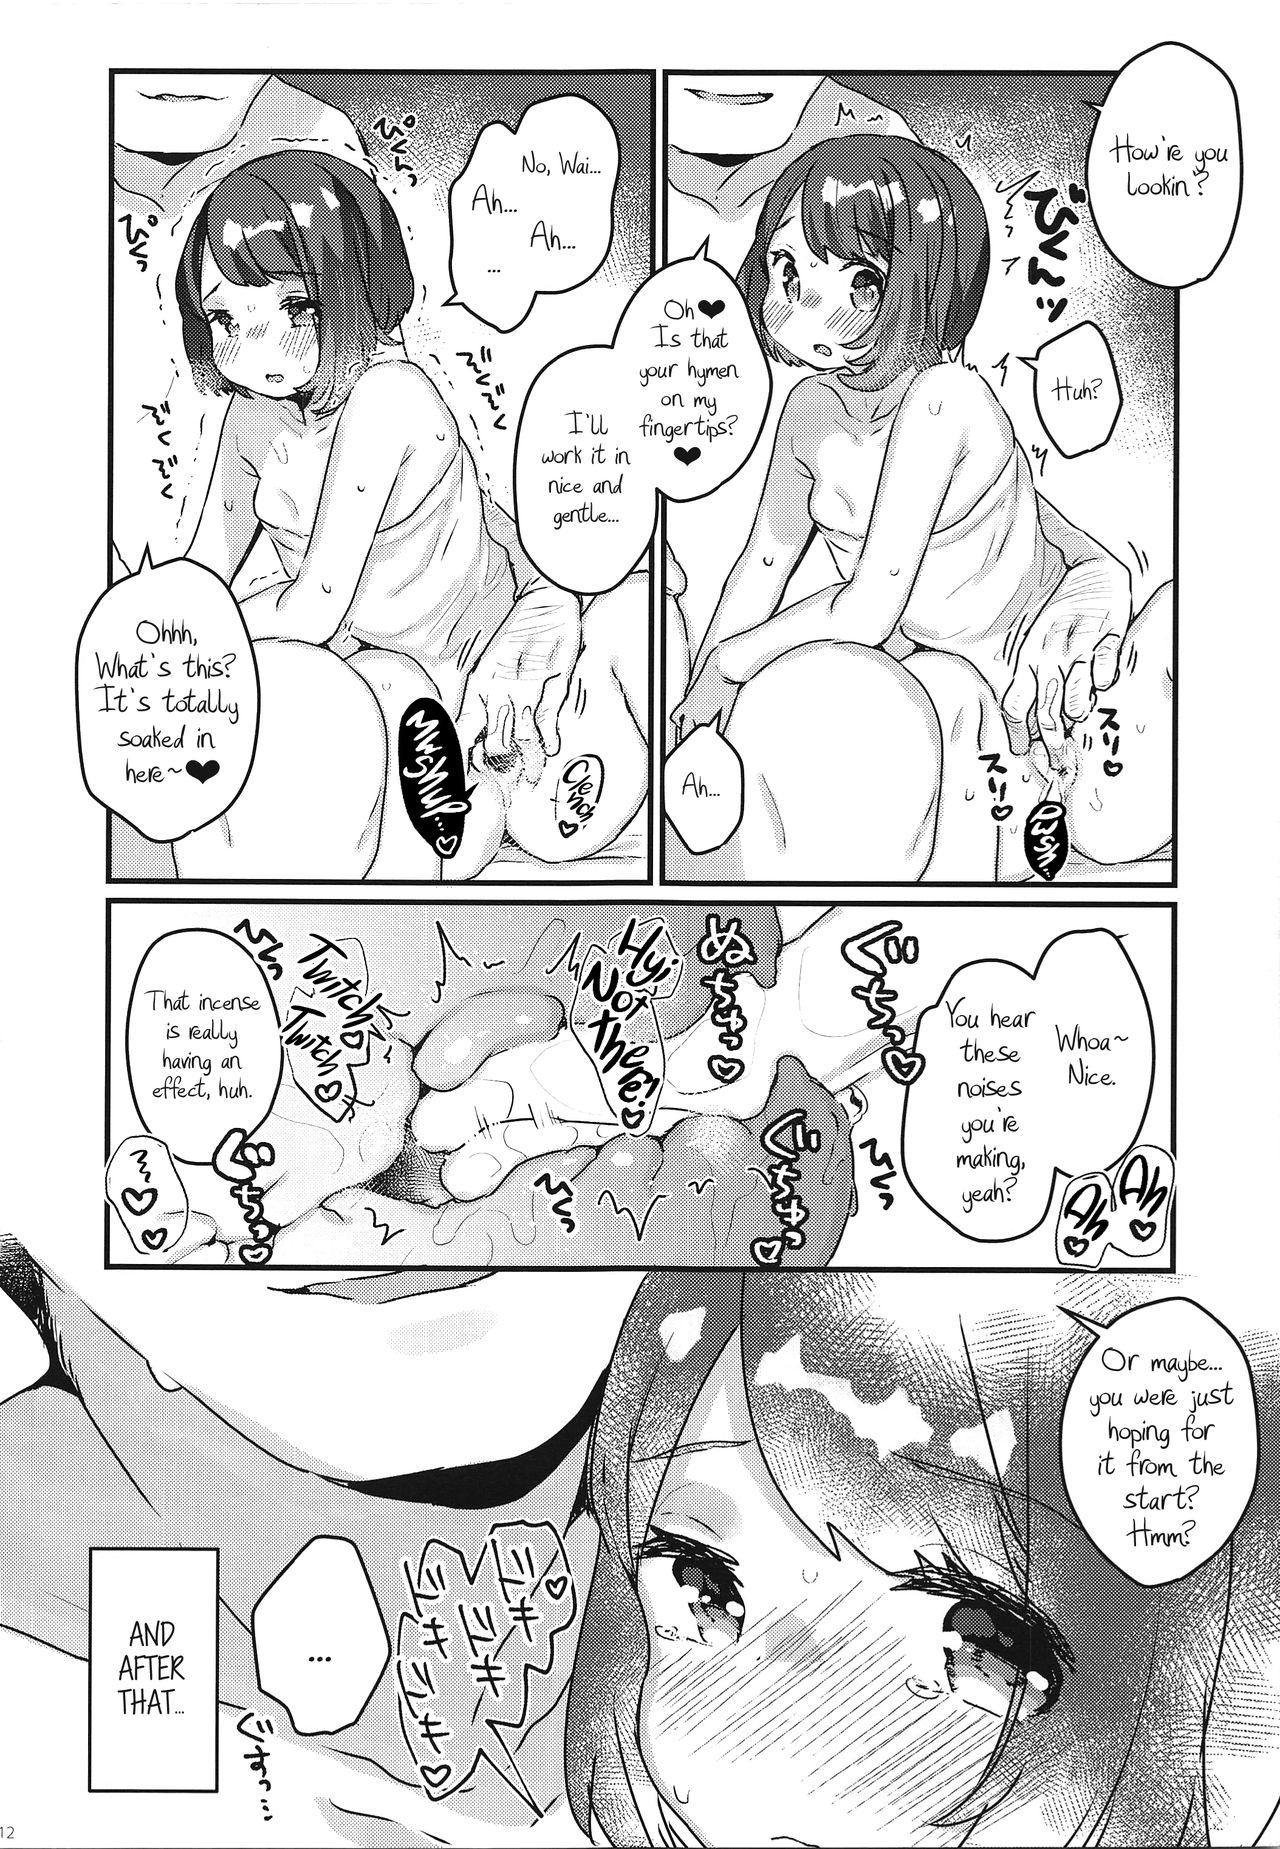 Teensex "Datte Fuku, Taka Iindamon" | "I Mean, Clothes Are Just so Expensive~" - Pokemon Ex Girlfriend - Page 12